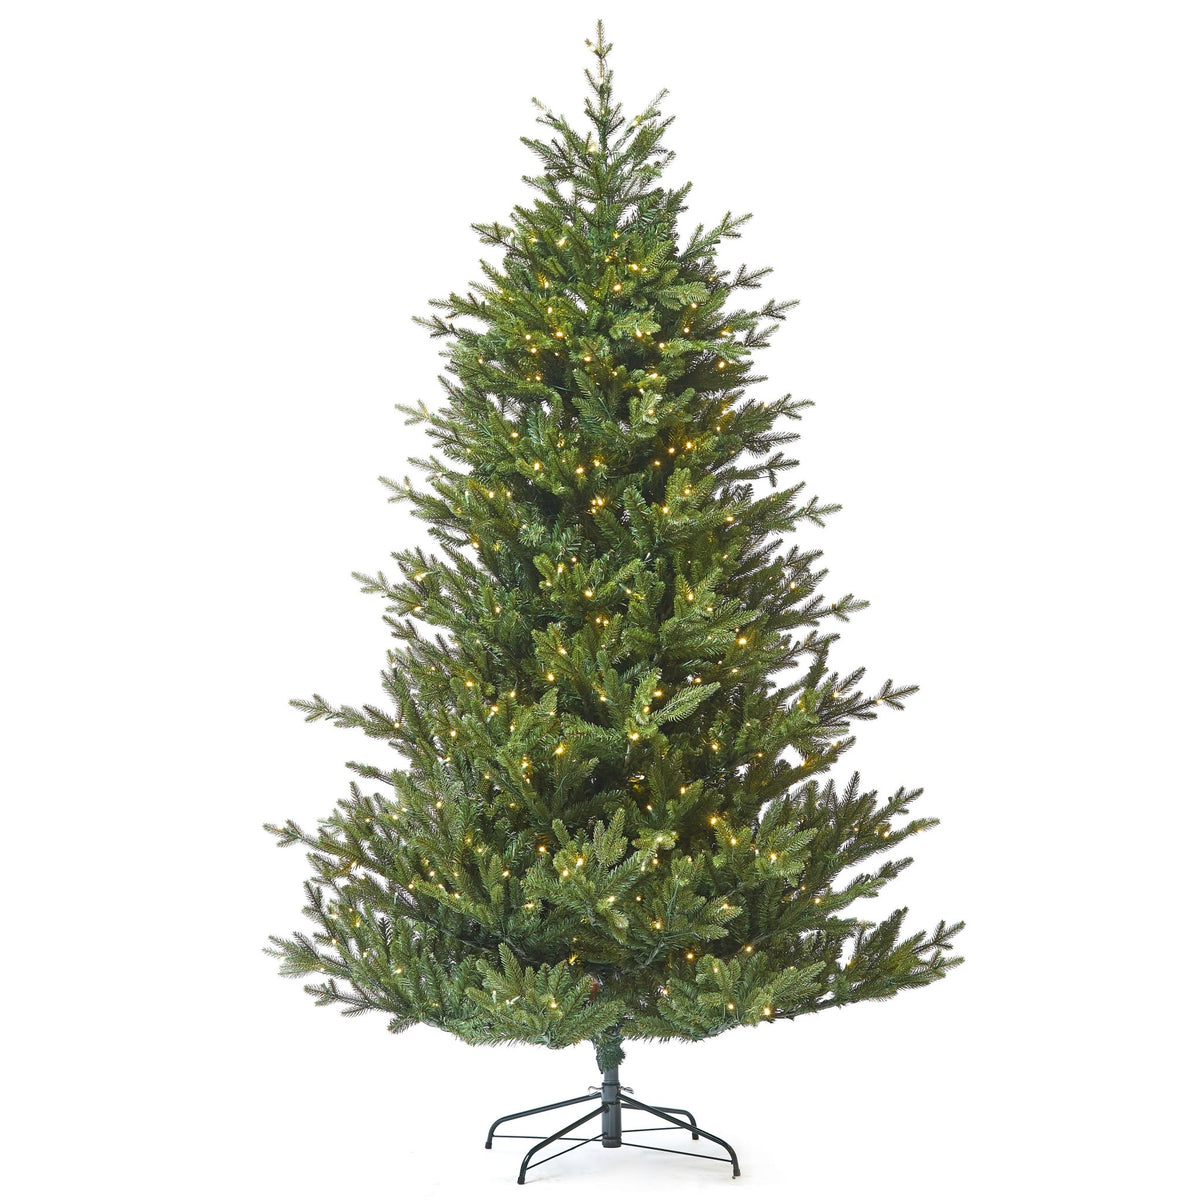 7.5ft Frosted Asheville Fraser Fir Tree w/ WW LED Lights - Holiday Warehouse